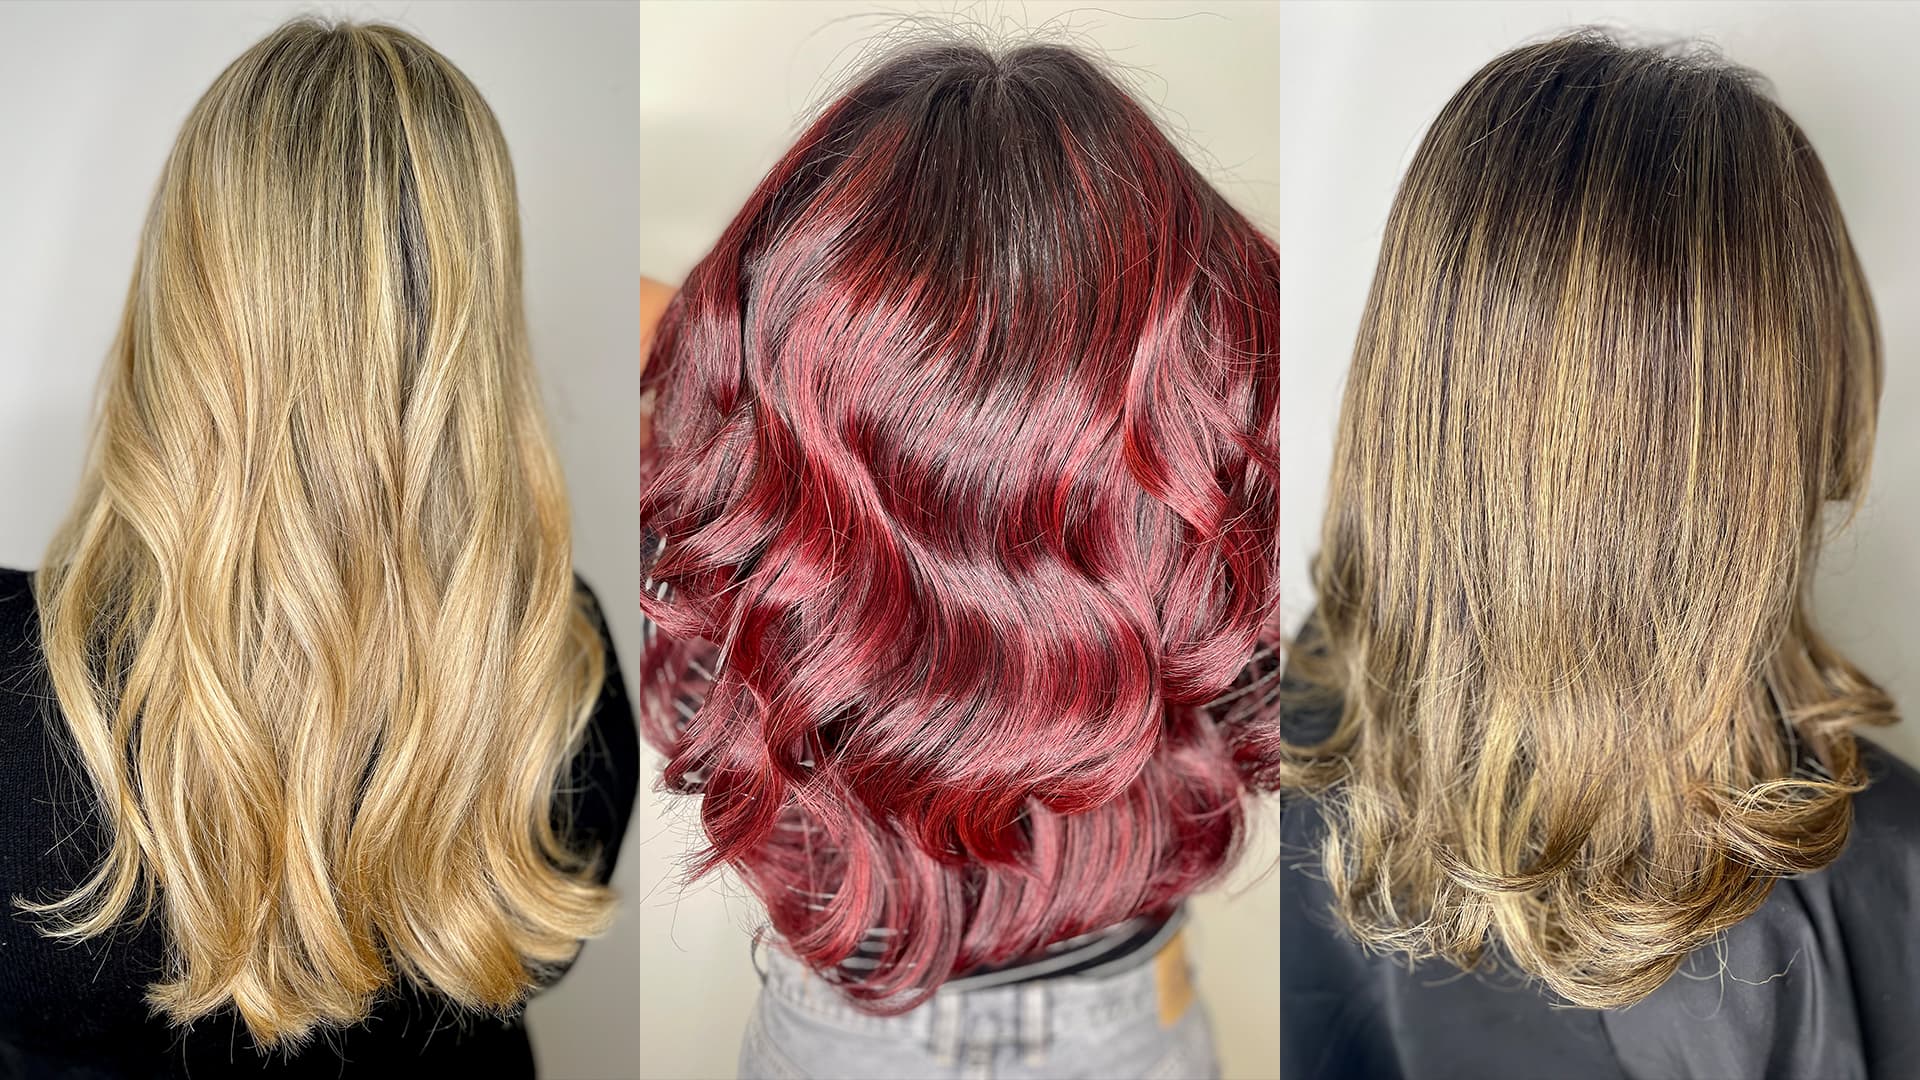 Professionelle Haarfarben in Basel - Coiffeur Orion